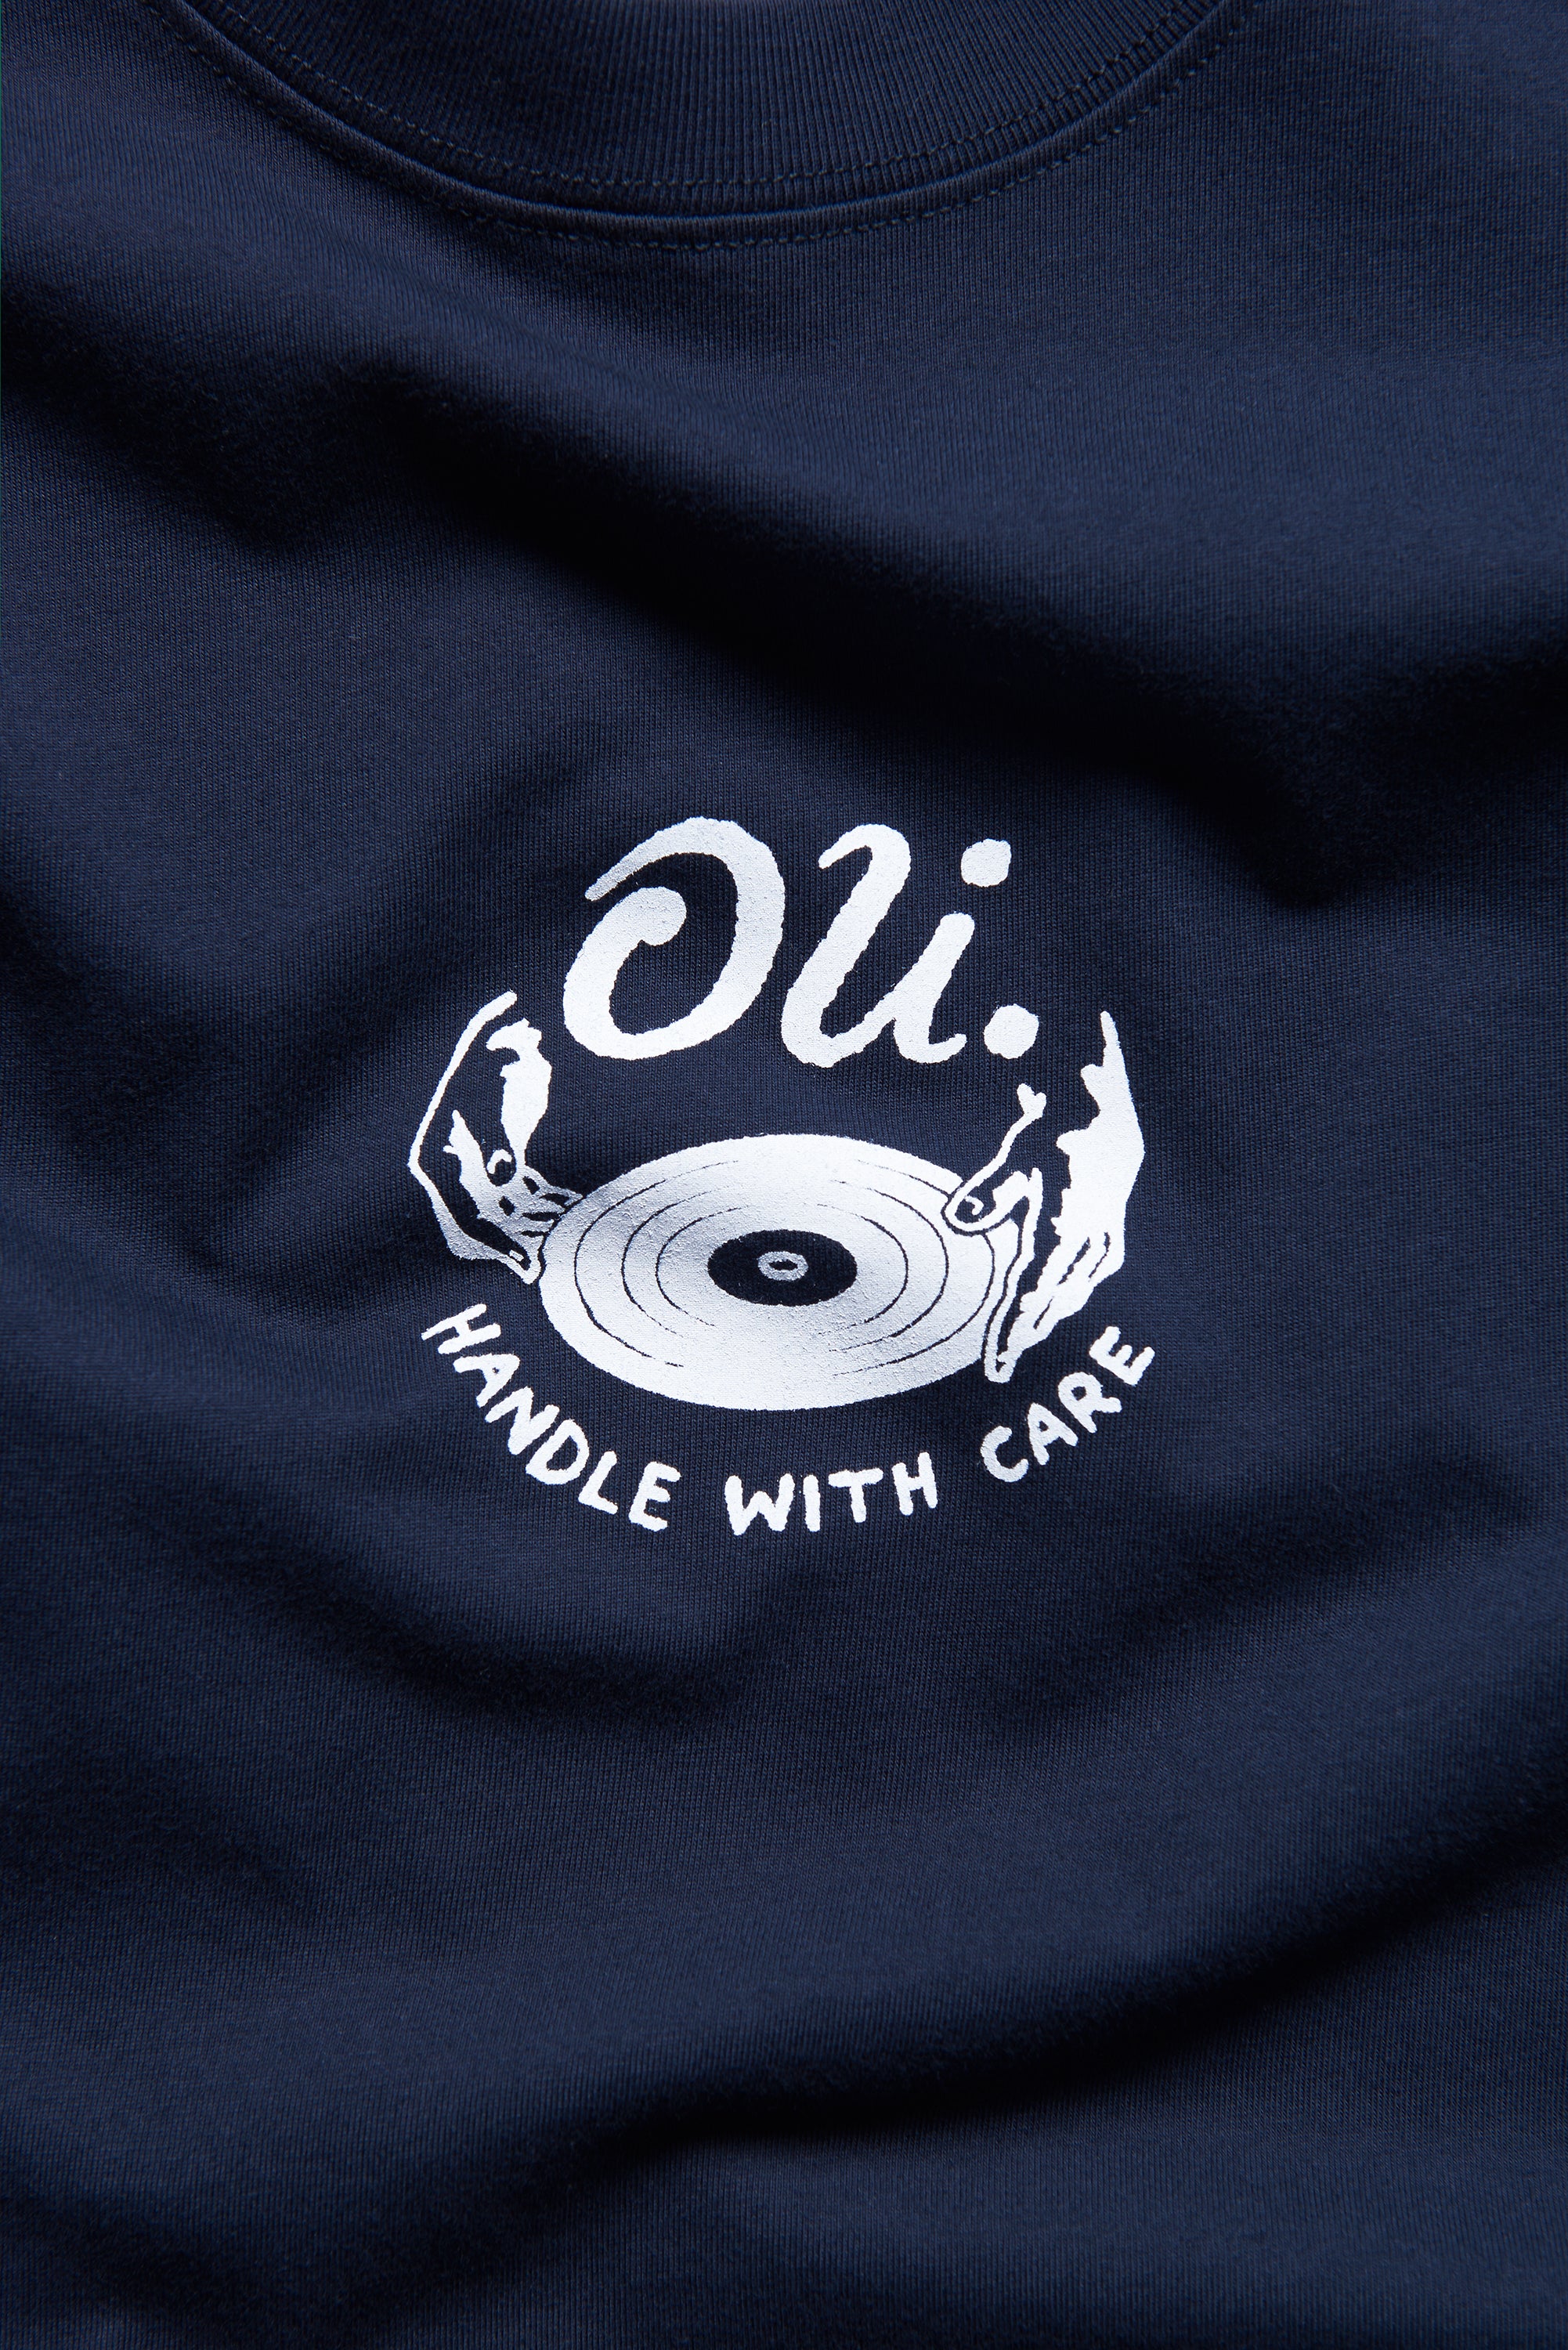 Handle With Care T - Navy